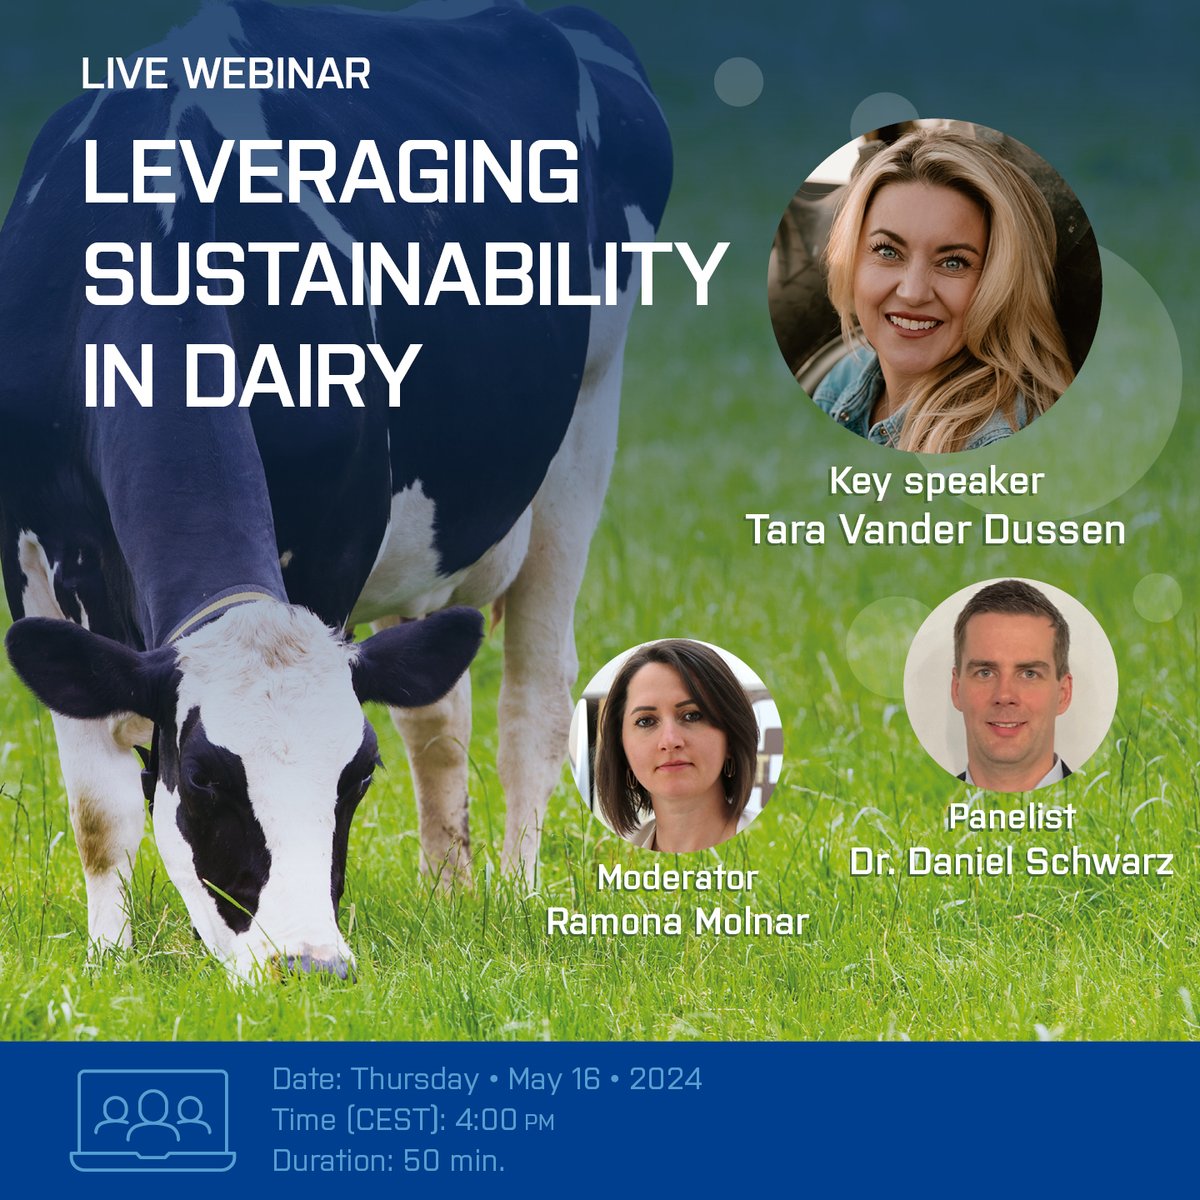 'Dairy has a pivotal role in shaping a sustainable future for food production,” says Tara Vander Dussen, a dairy farmer and environmental scientist with extensive experience as an international speaker about dairy sustainability. Learn more fossanalytics.com/en/landingpage…